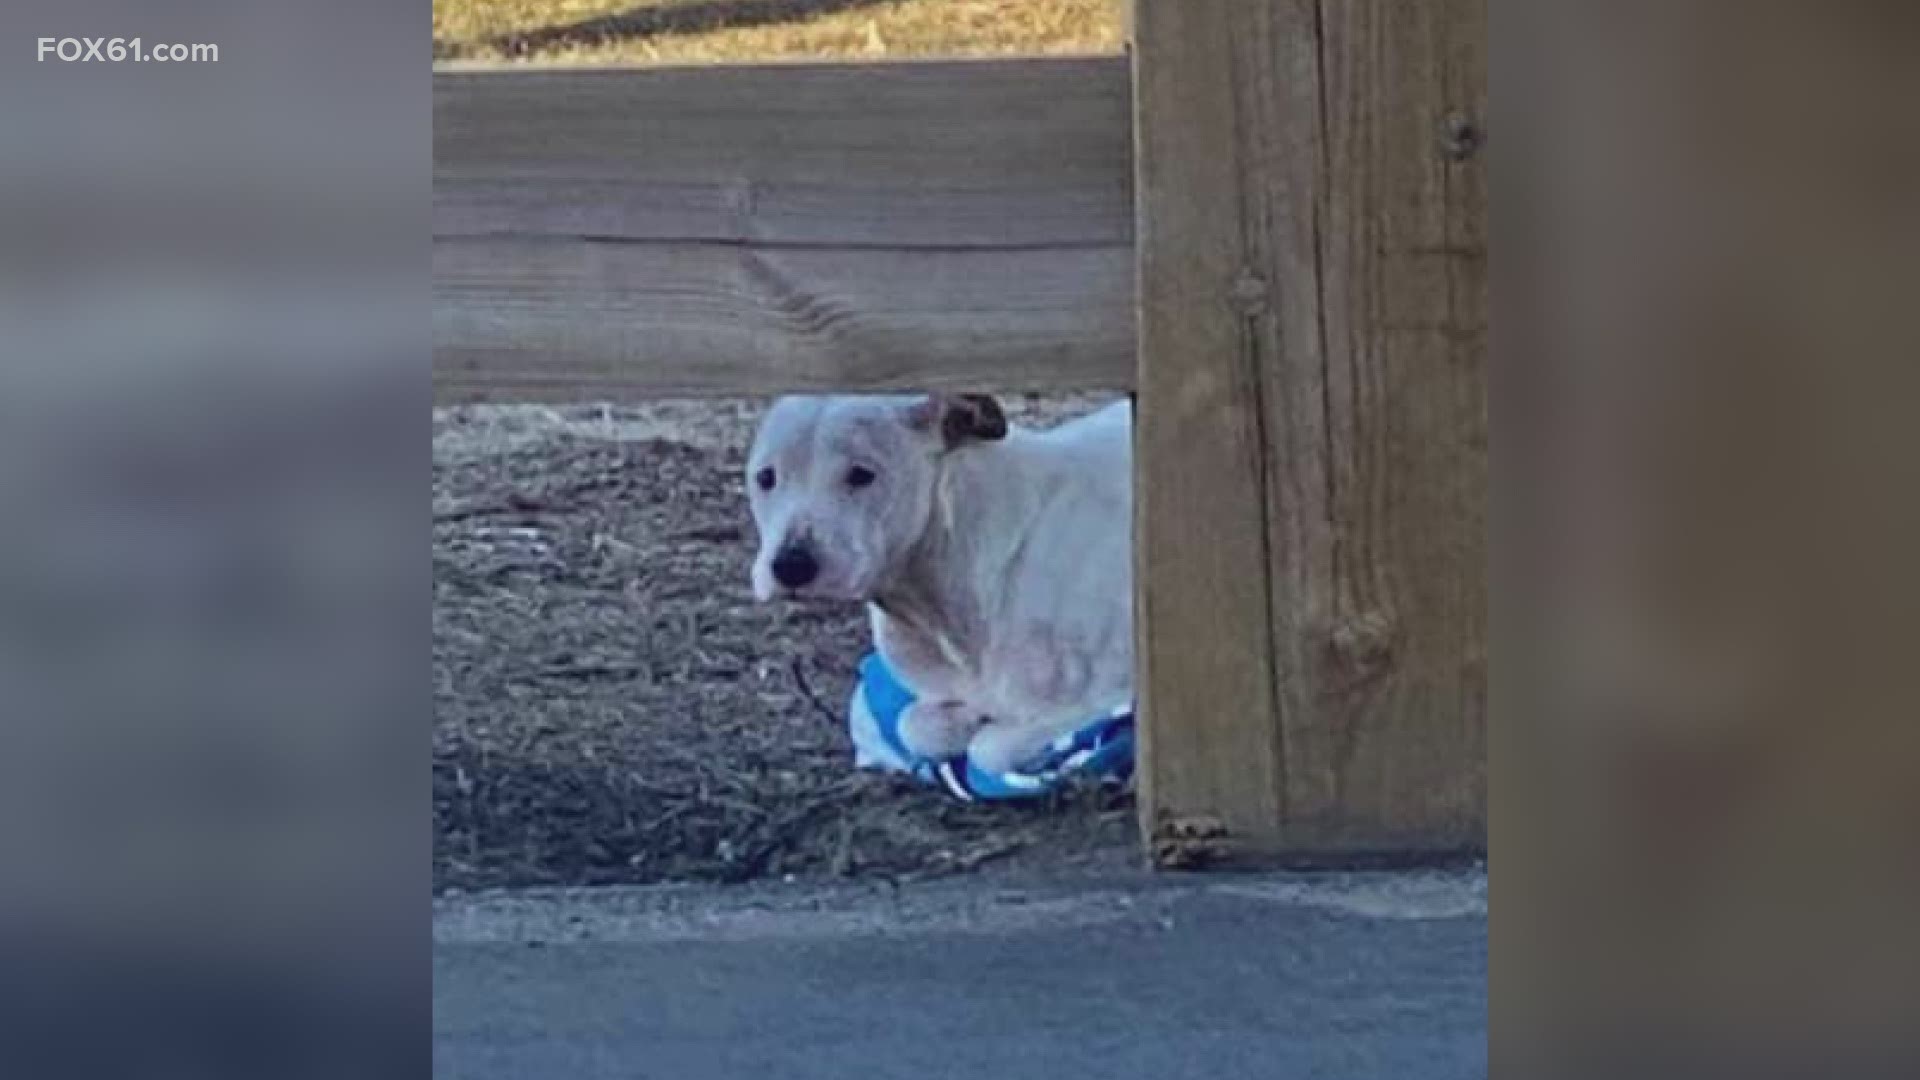 The shelter said that the dog was at least 10-20 pounds underweight and had démodex mange, overgrown toenails, and had pressure sores from being created